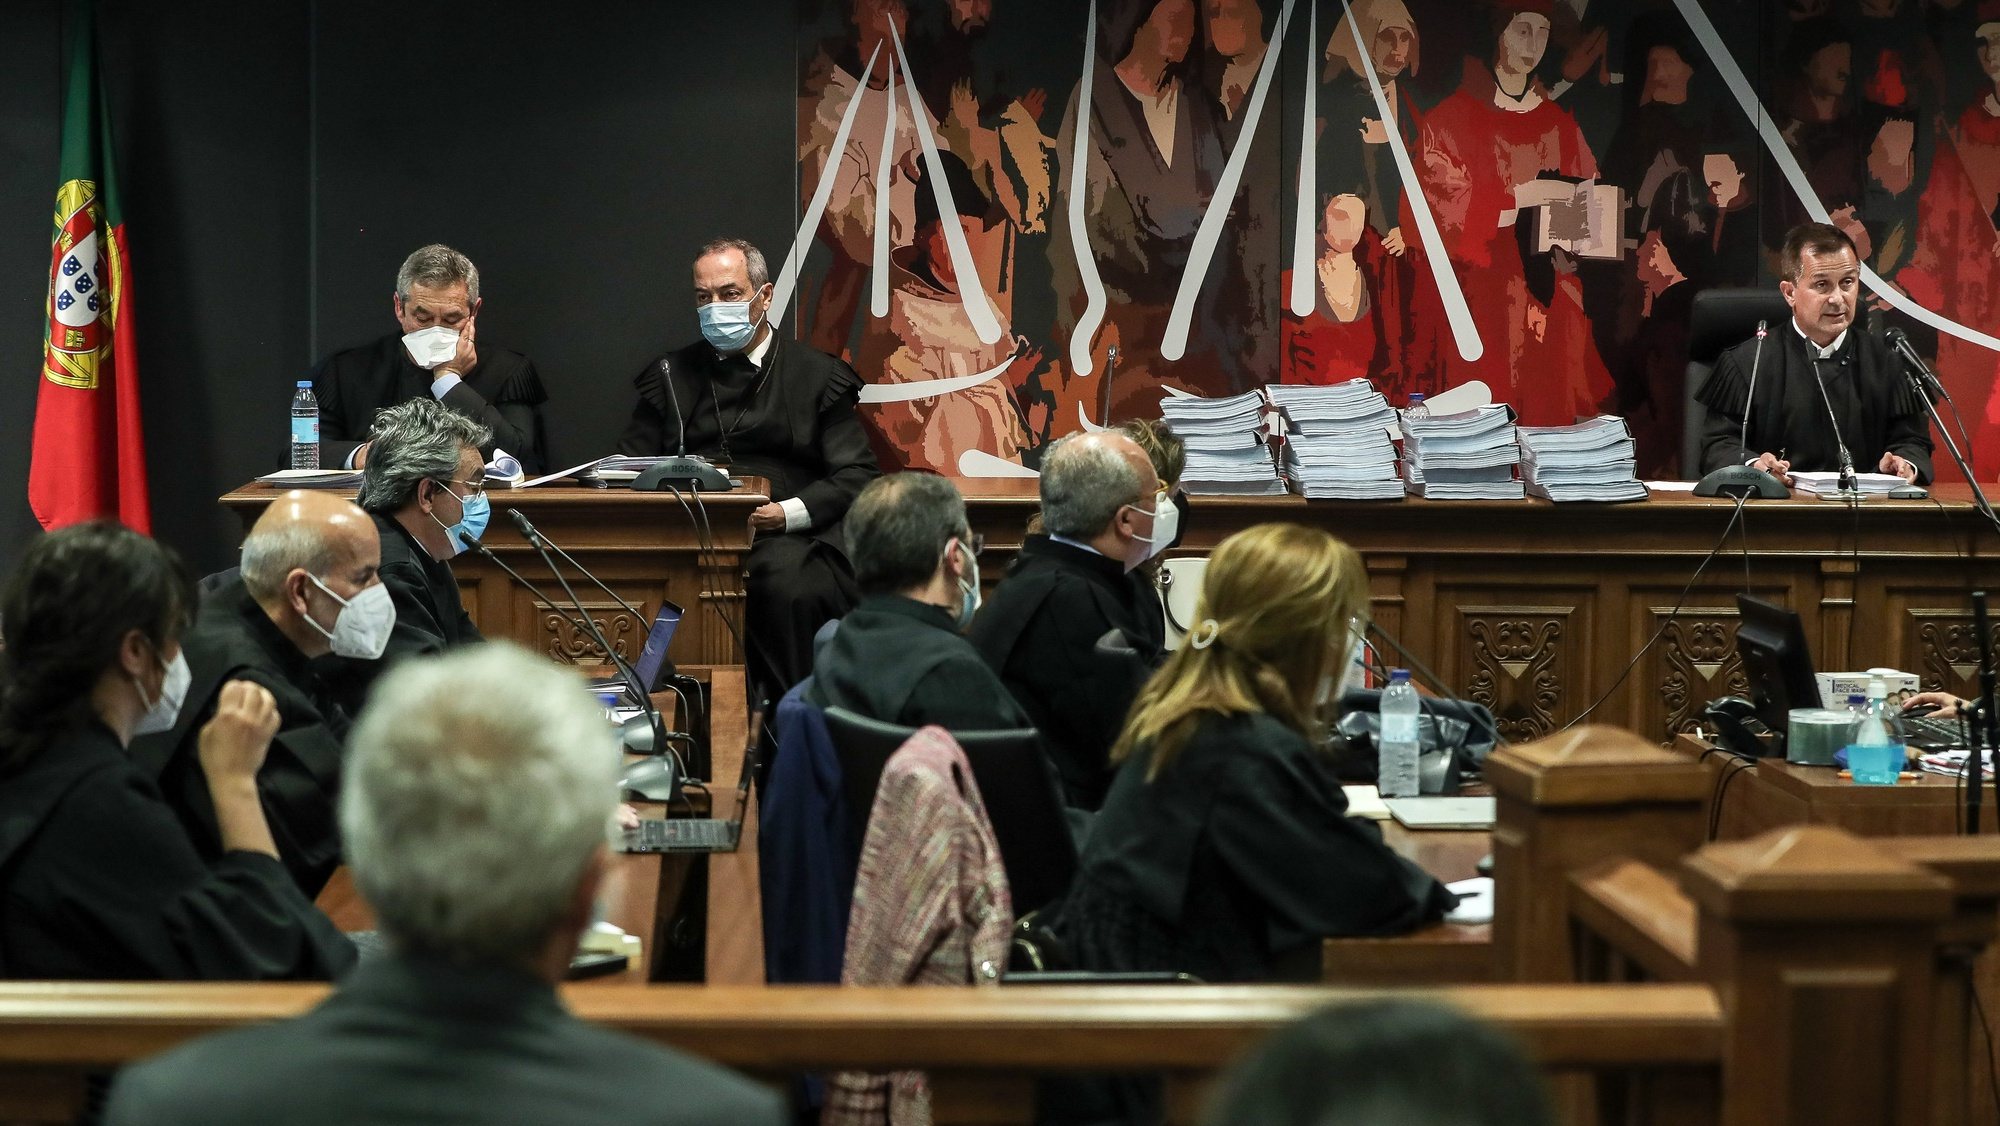 Judge Ivo Rosa (R) accompanied by the prosecutors Rosario Teixeira (L) and judge Carlos Alexandre (C) during  the instructional decision session of the high-profile corruption case known as Operation Marques, which involves the Portugal&#039;s former Prime Minister Jose Socrates,  at the Justice Campus in Lisbon, Portugal, 9 April 2021. Operation Marques has 28 defendants - 19 people and 9 companies - including former Prime Minister Jose Socrates, banker Ricardo Salgado, businessman and friend of Socrates Carlos Santos Silva and senior staff of Portugal Telecom and is related to crimes of corruption, active and passive, money laundering, document forgery and tax fraud. MARIO CRUZ / POOL/ LUSA